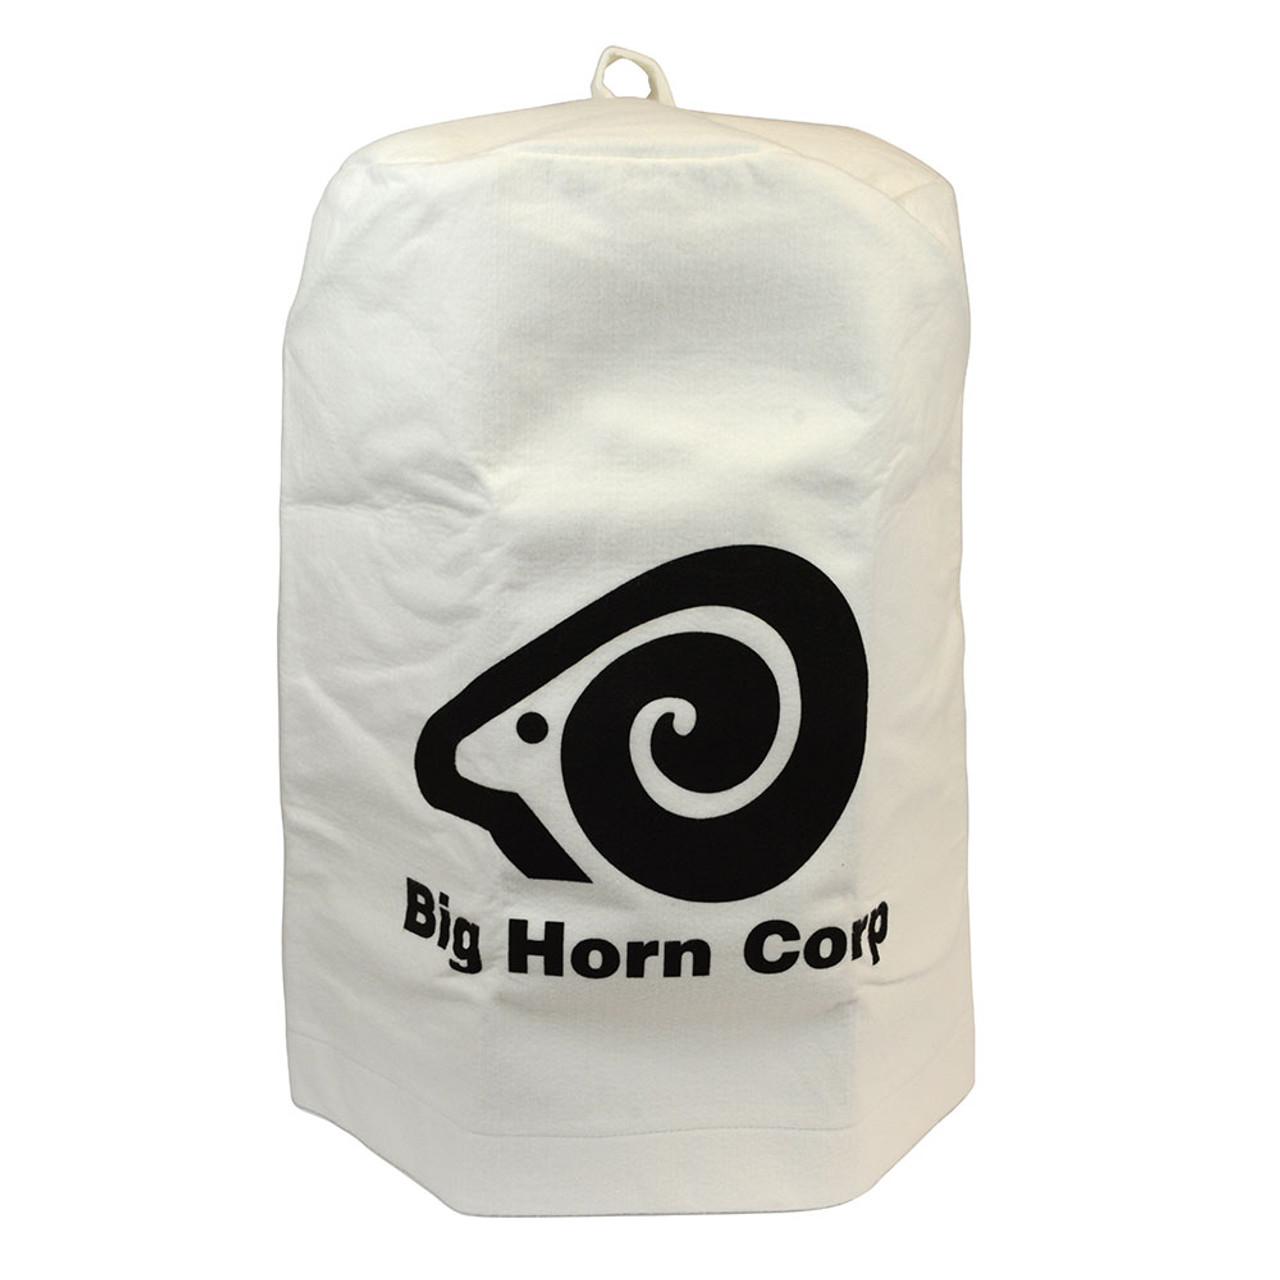 Big Horn 20 Inch 1 Micron Dust Filter Bag, 31 Inch X 31.5 Inch - Replaces Jet 708698 11765